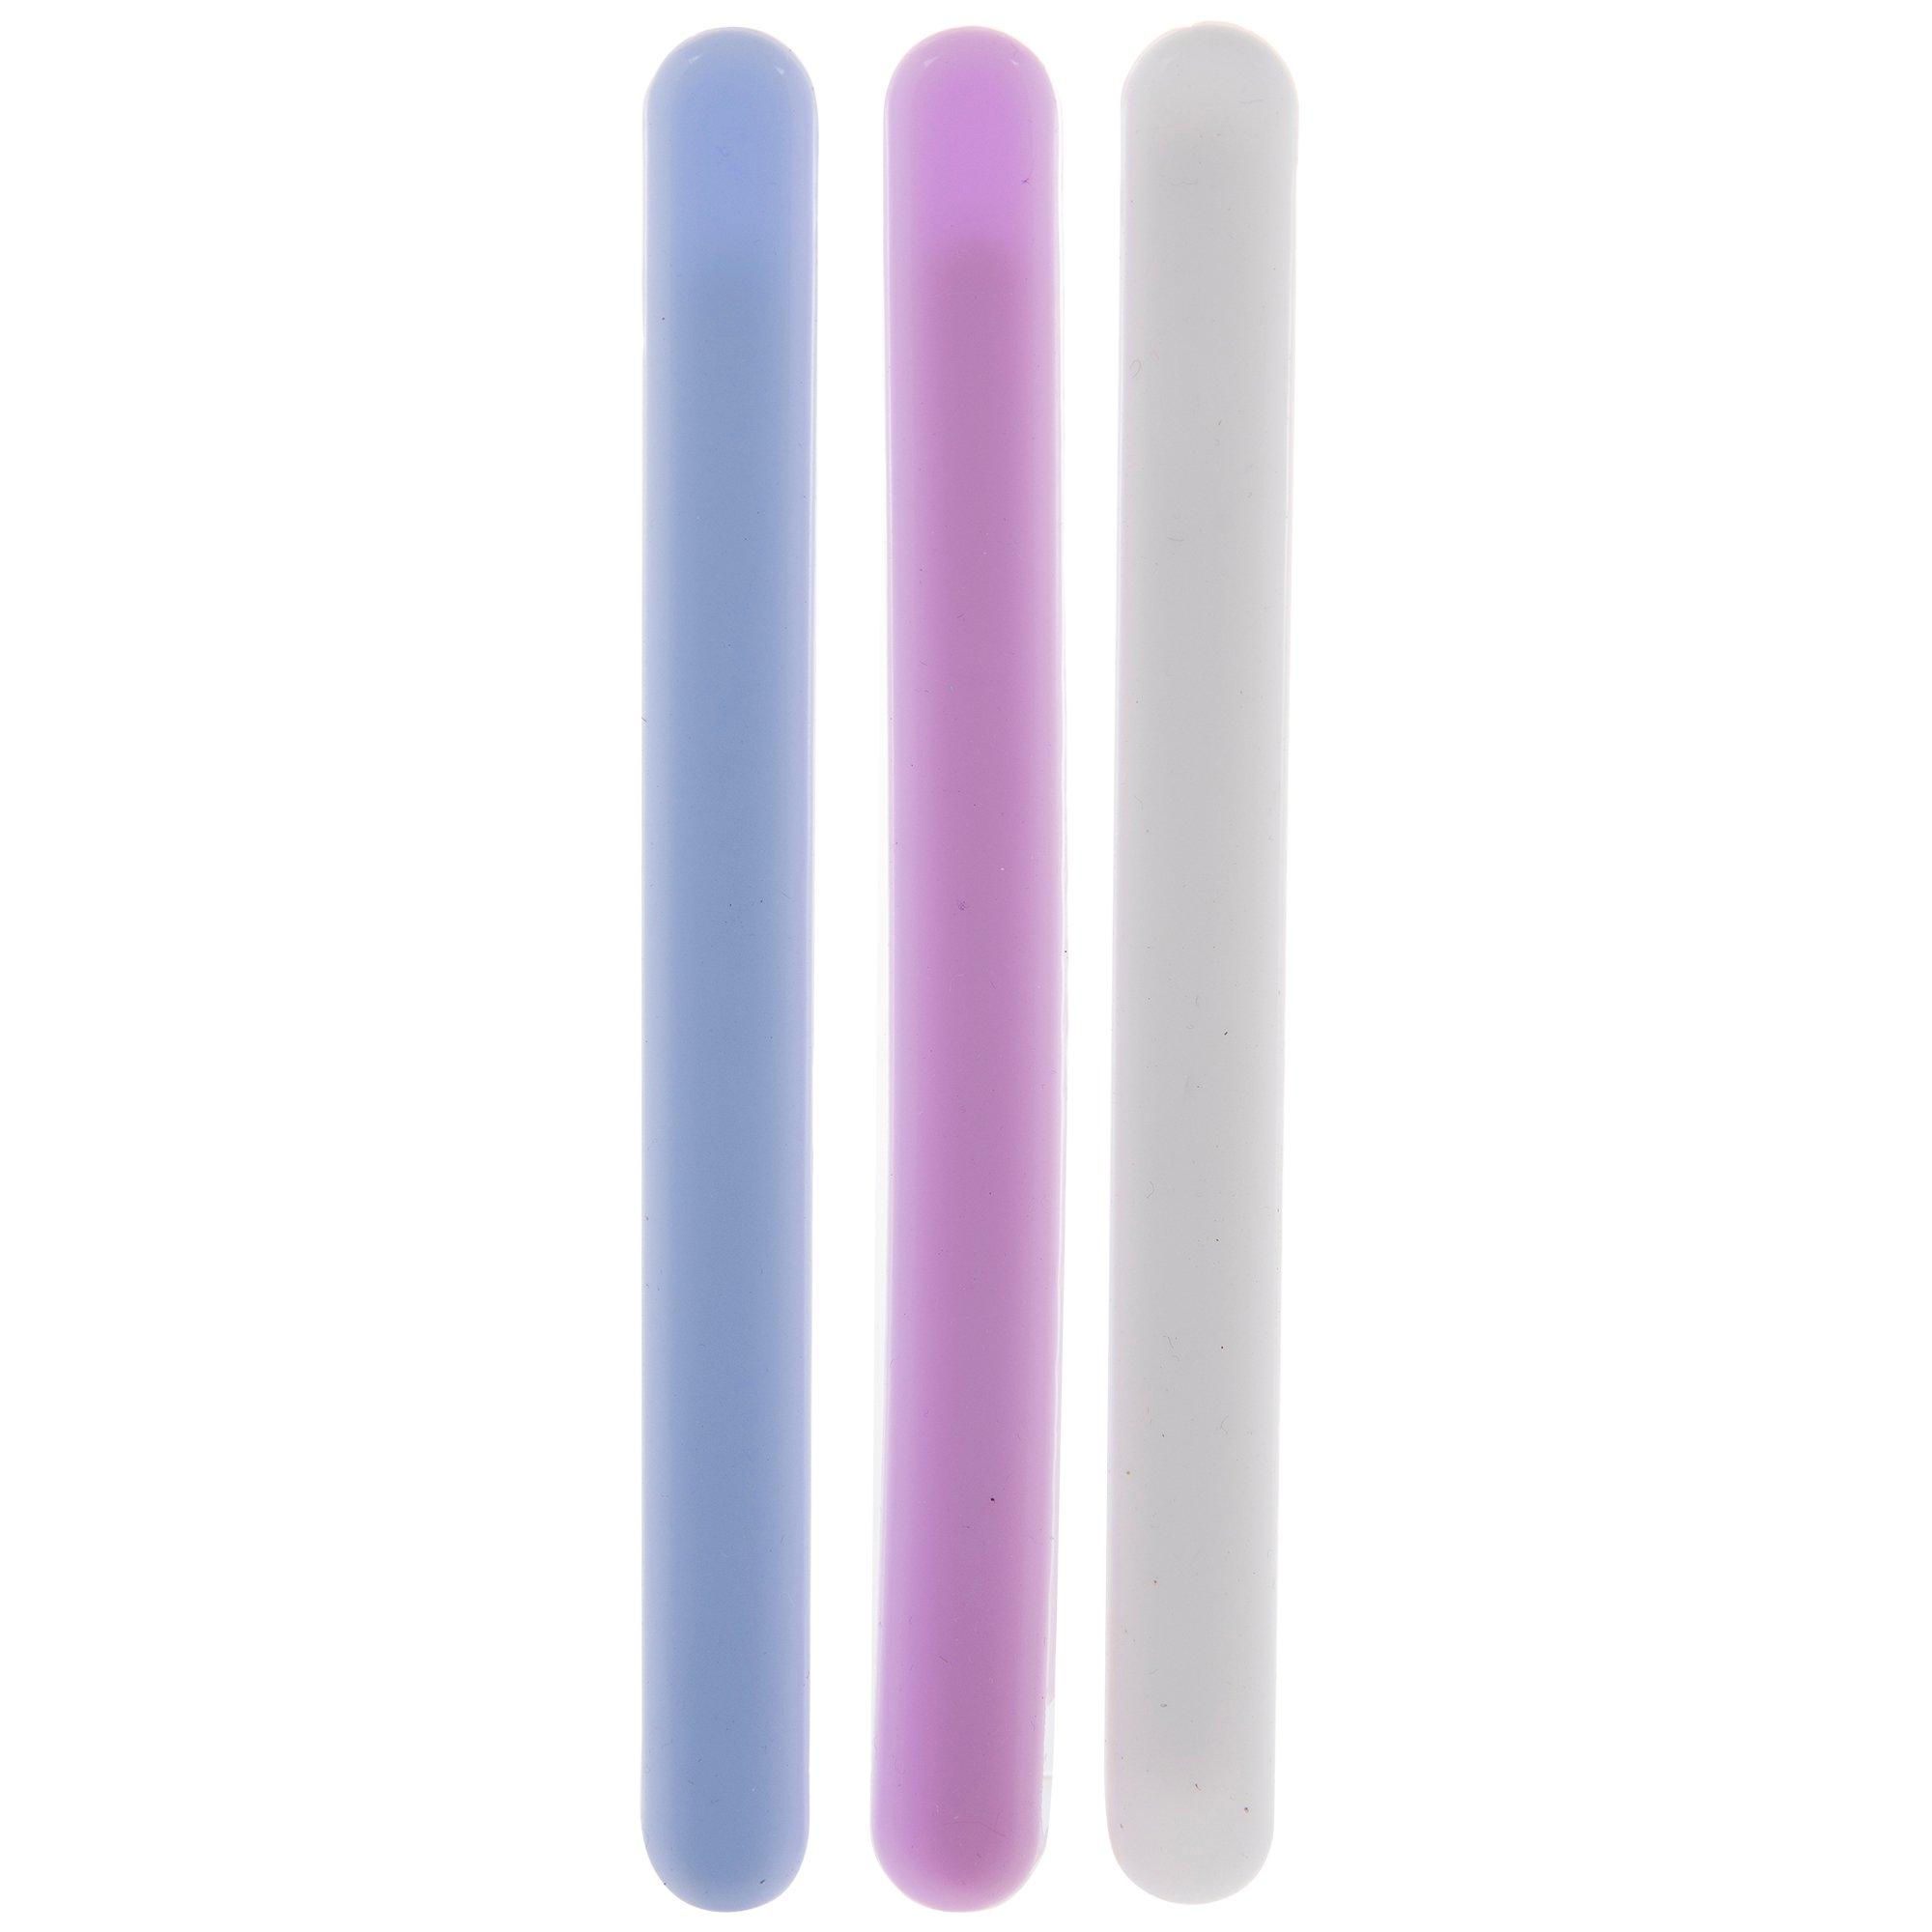 Silicone Stir Sticks 160mm Length Stirring Rods for Resin Mixing